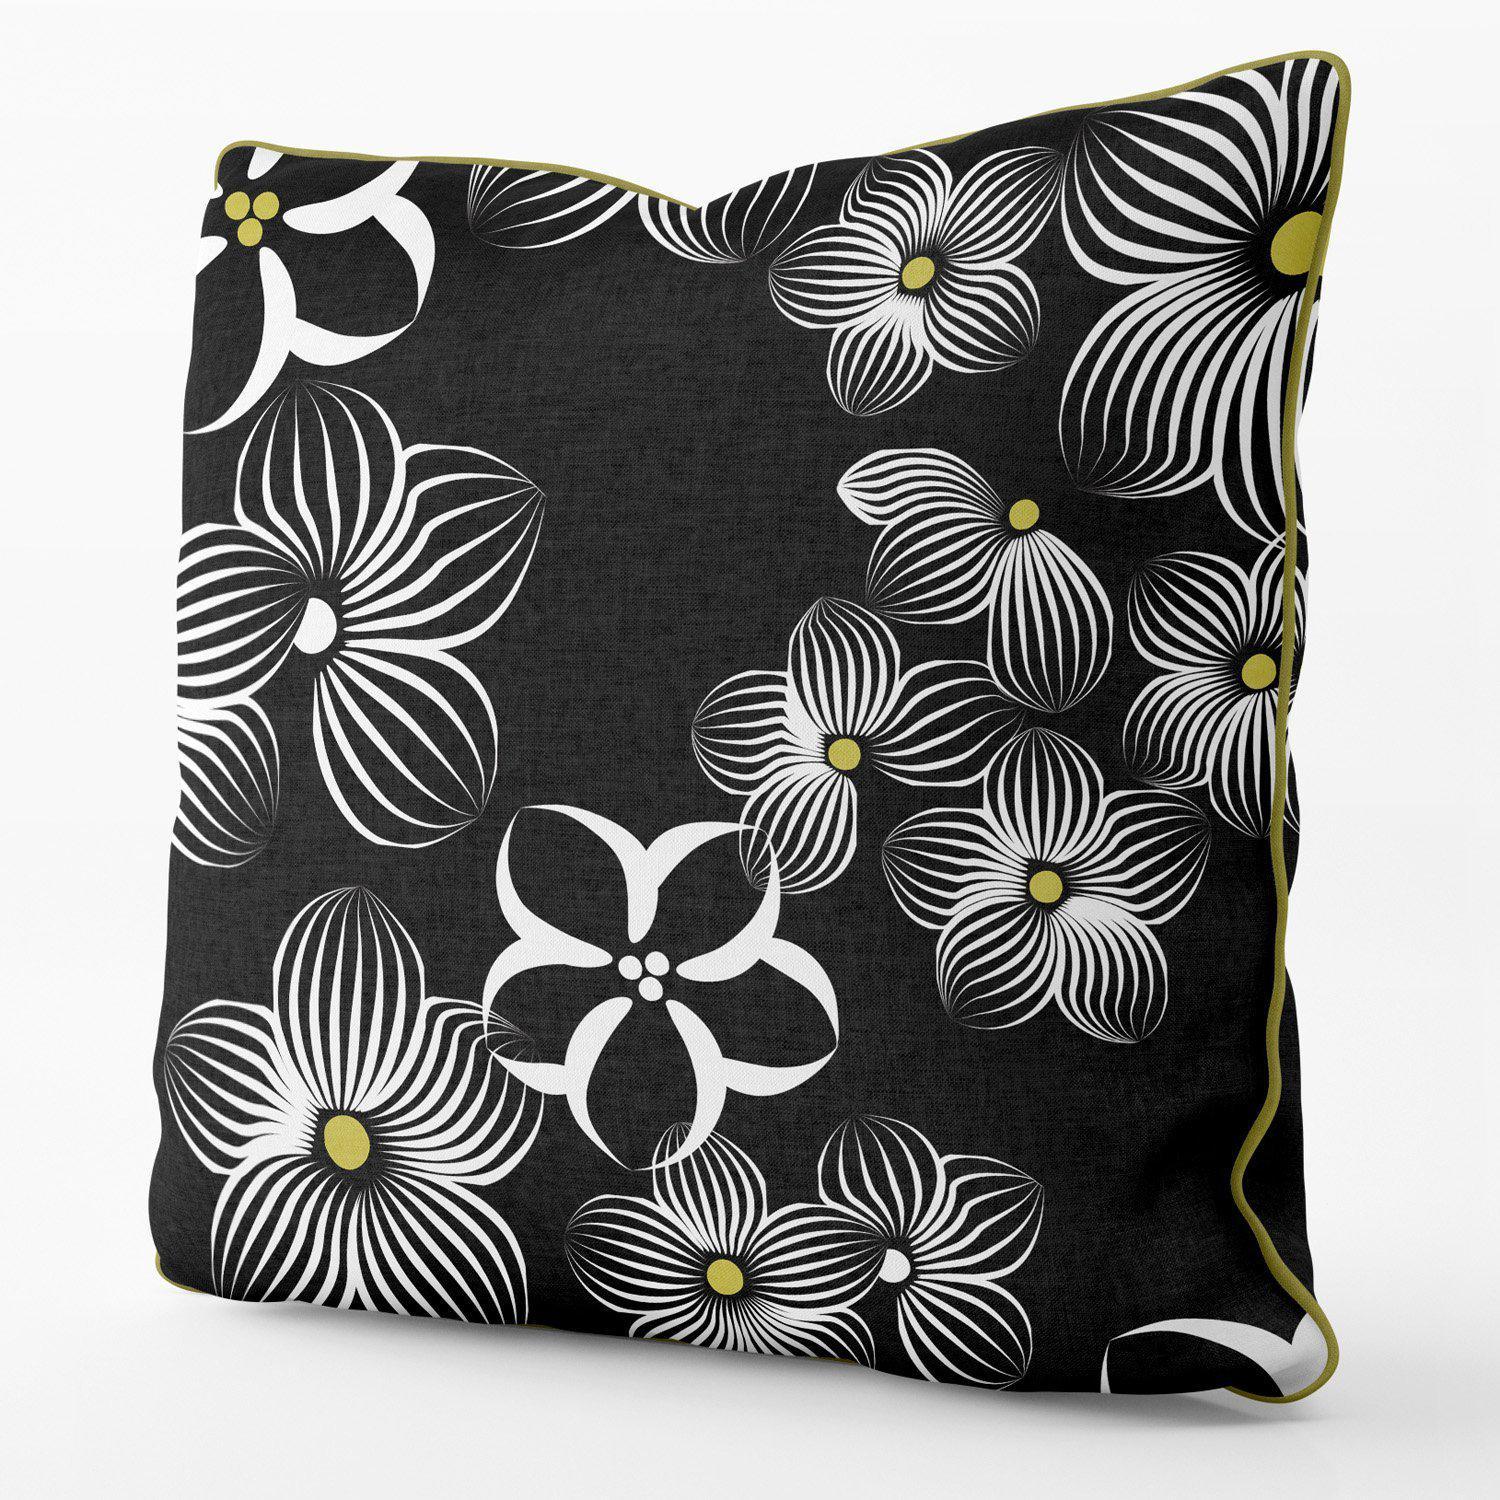 Floral Impression (Black) - Funky Art Cushion - Perfect Day - House Of Turnowsky Pillows - Handmade Cushions UK - WeLoveCushions